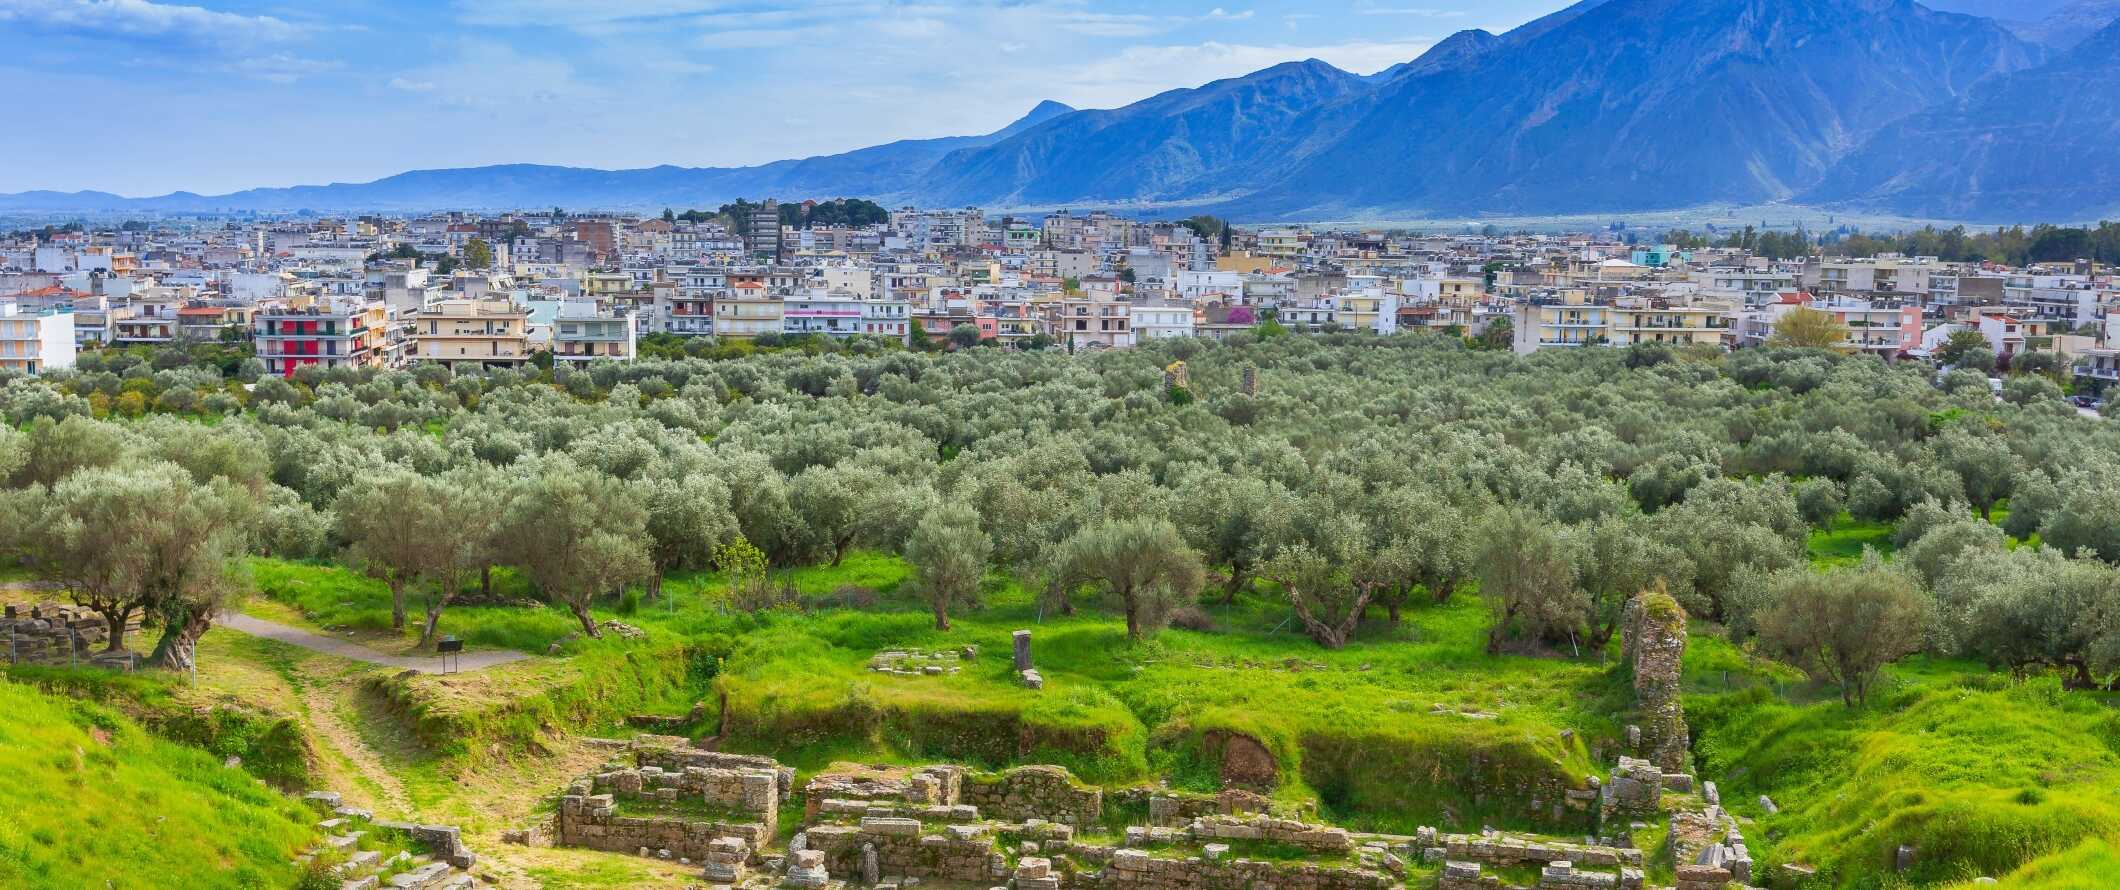 Ancient ruins in the foreground with the modern city of Sparta and mountains in the background in Greece